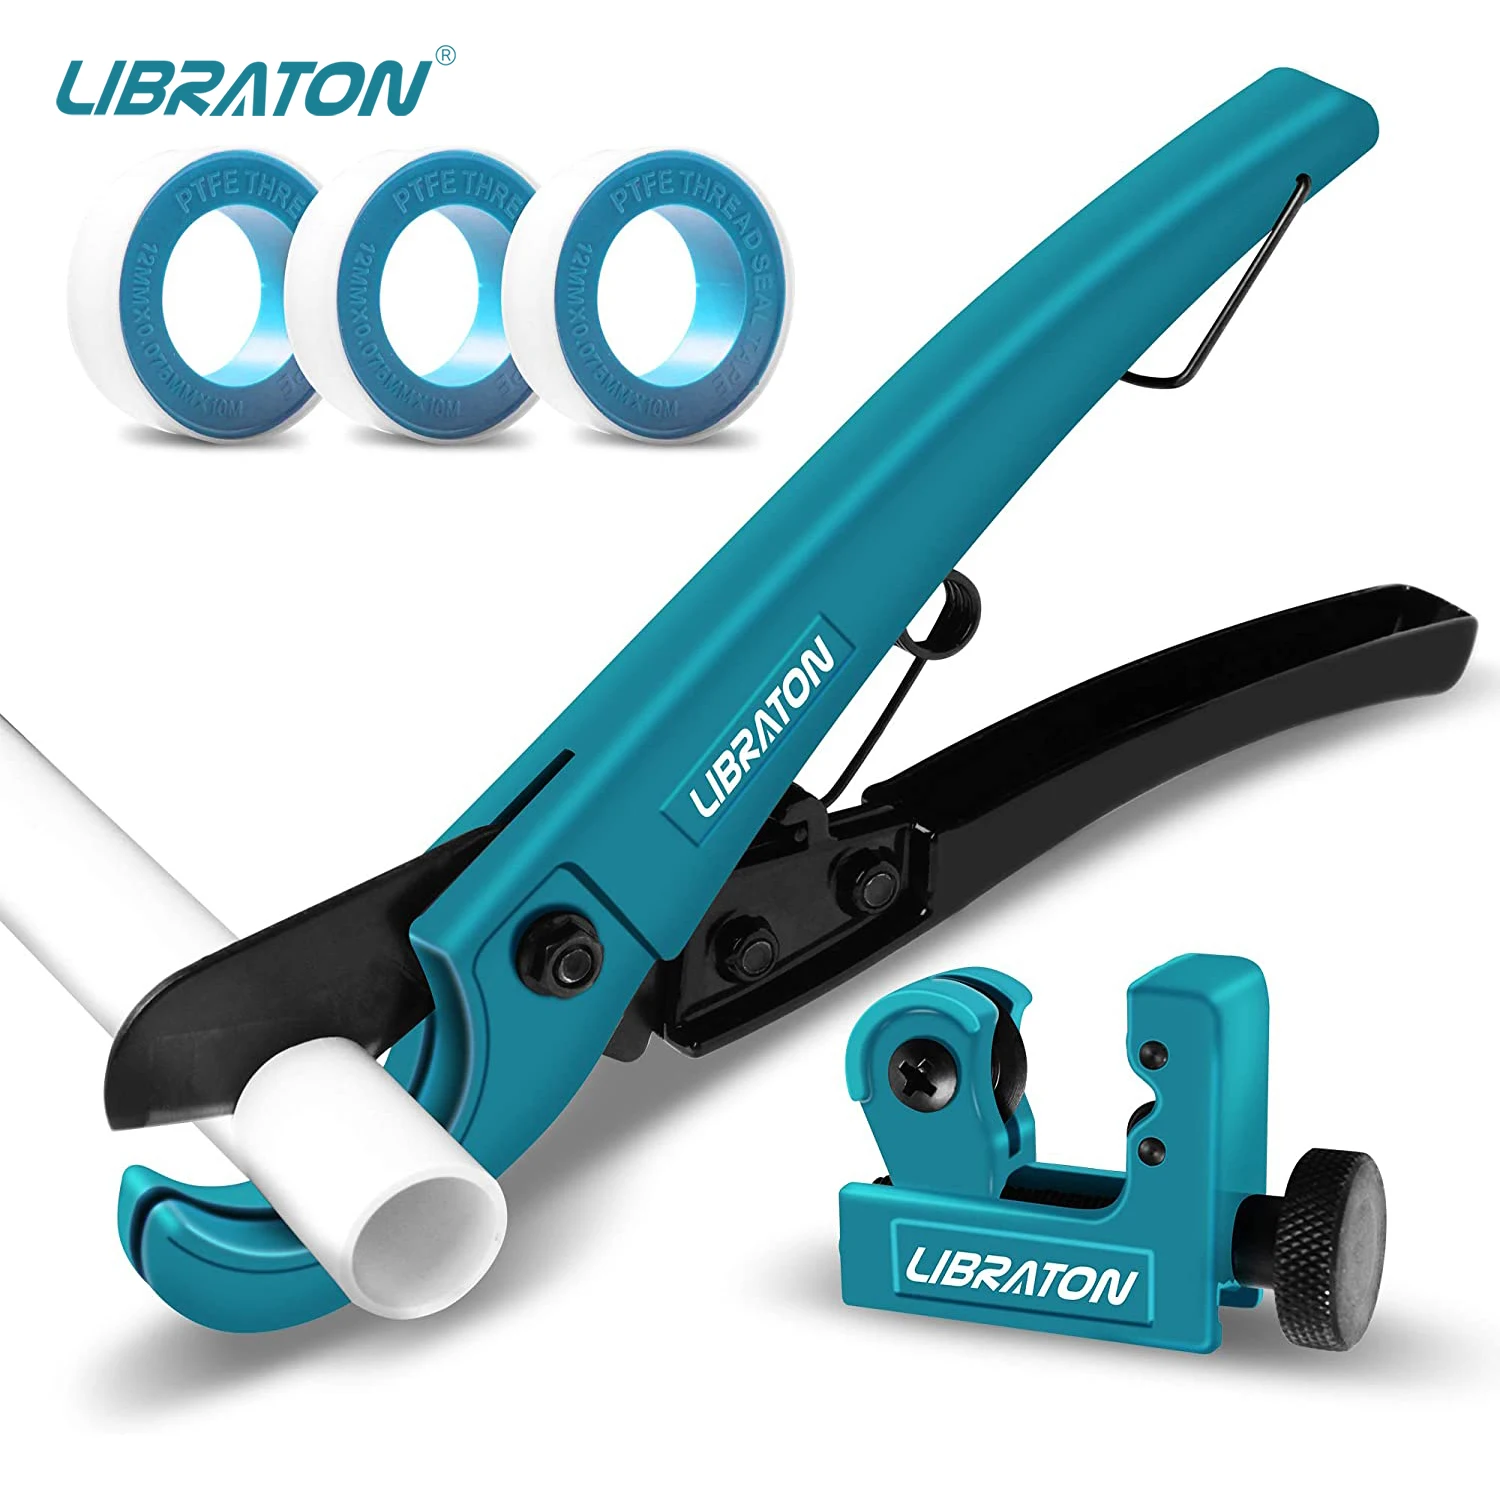 Libraton Pex Pipe Cutter Tools for PEX PVC (Thin) PPR Plastic UP to 1-1/4